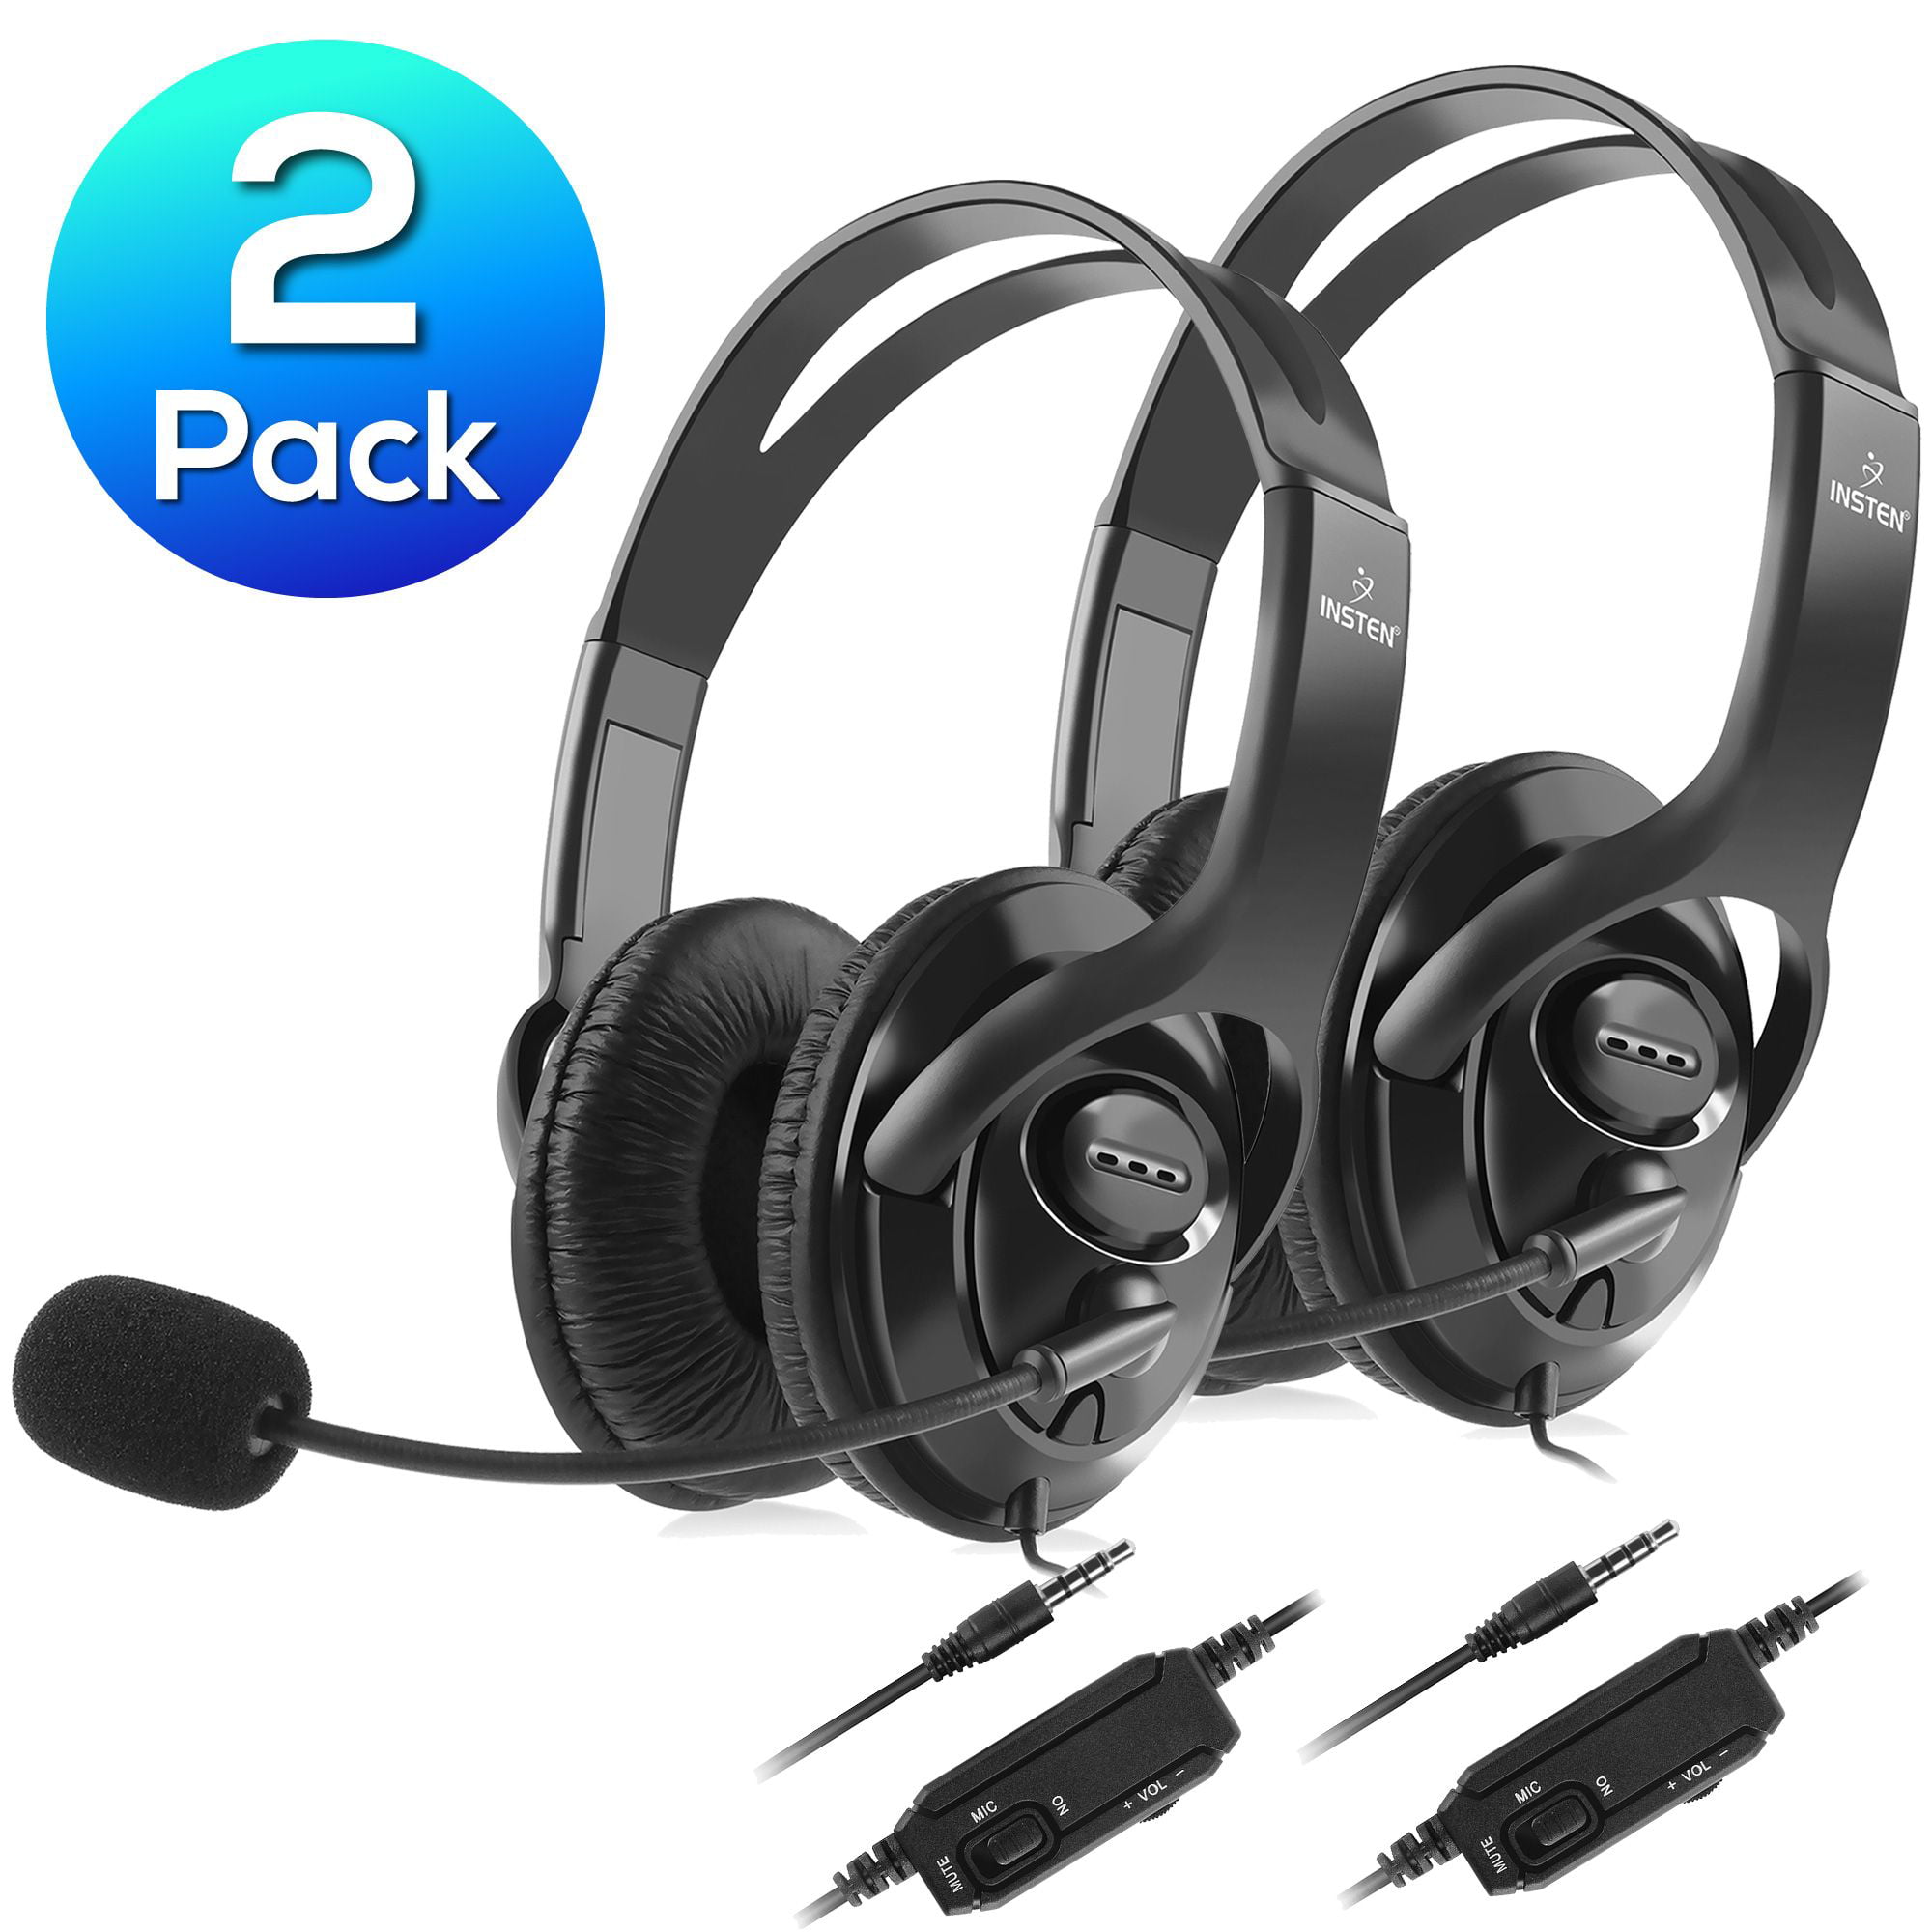 Insten 2x Wired Gaming Headset for PS4 Headphone with Microphone